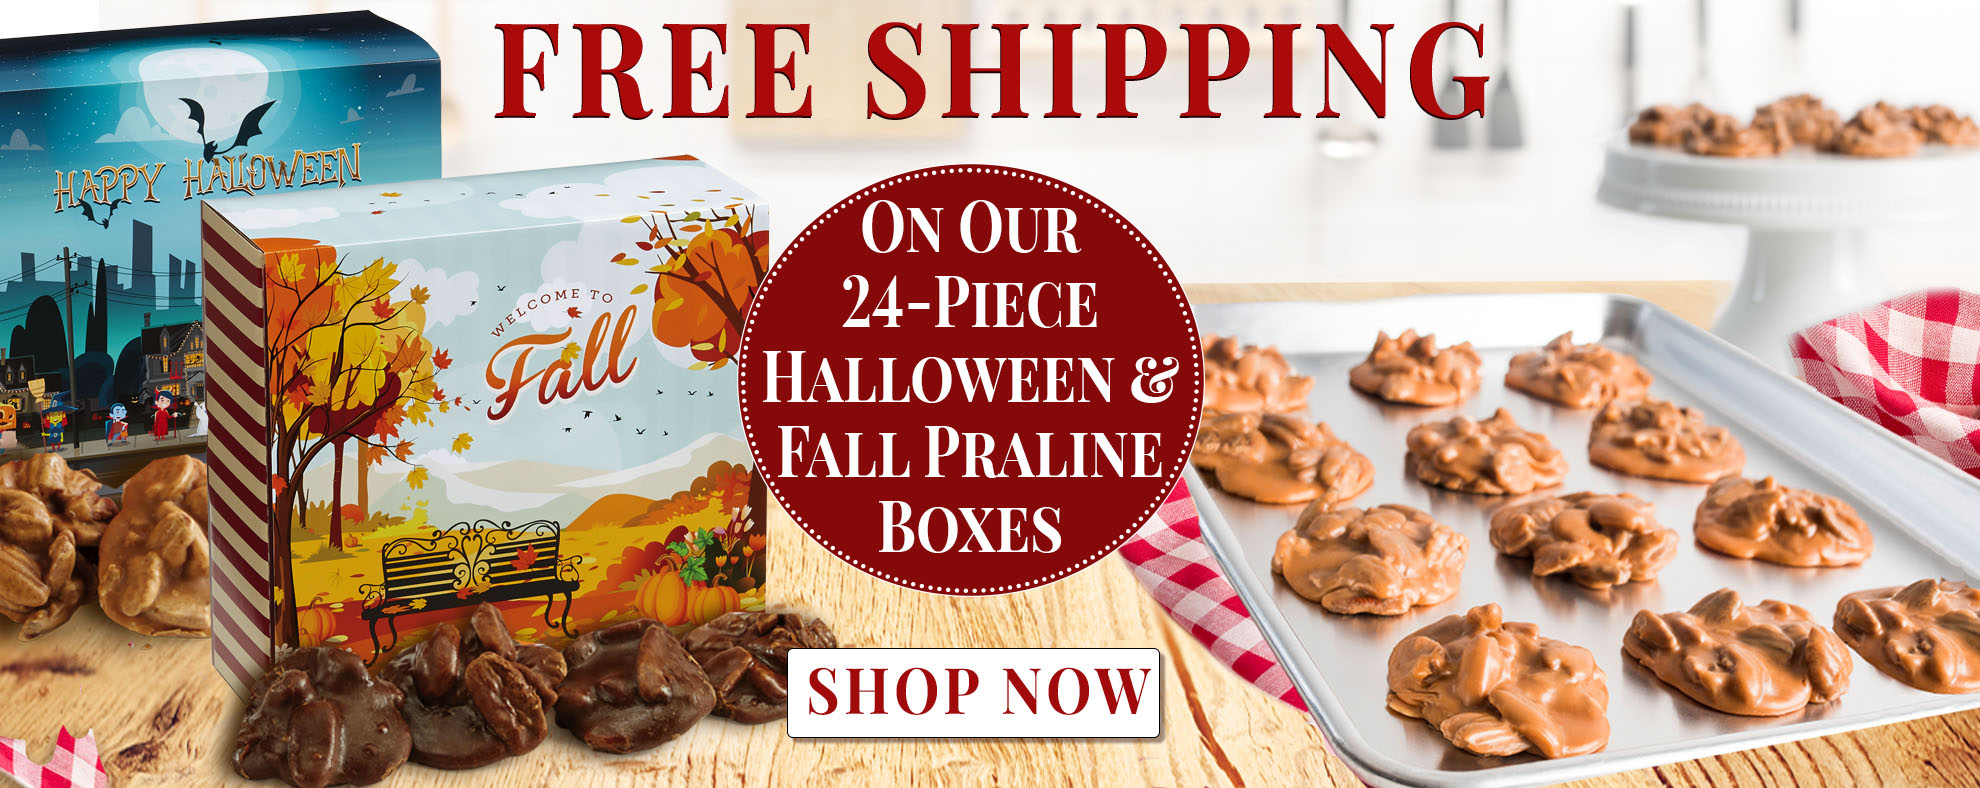 Fall and Halloween Free Ship Large Pralines